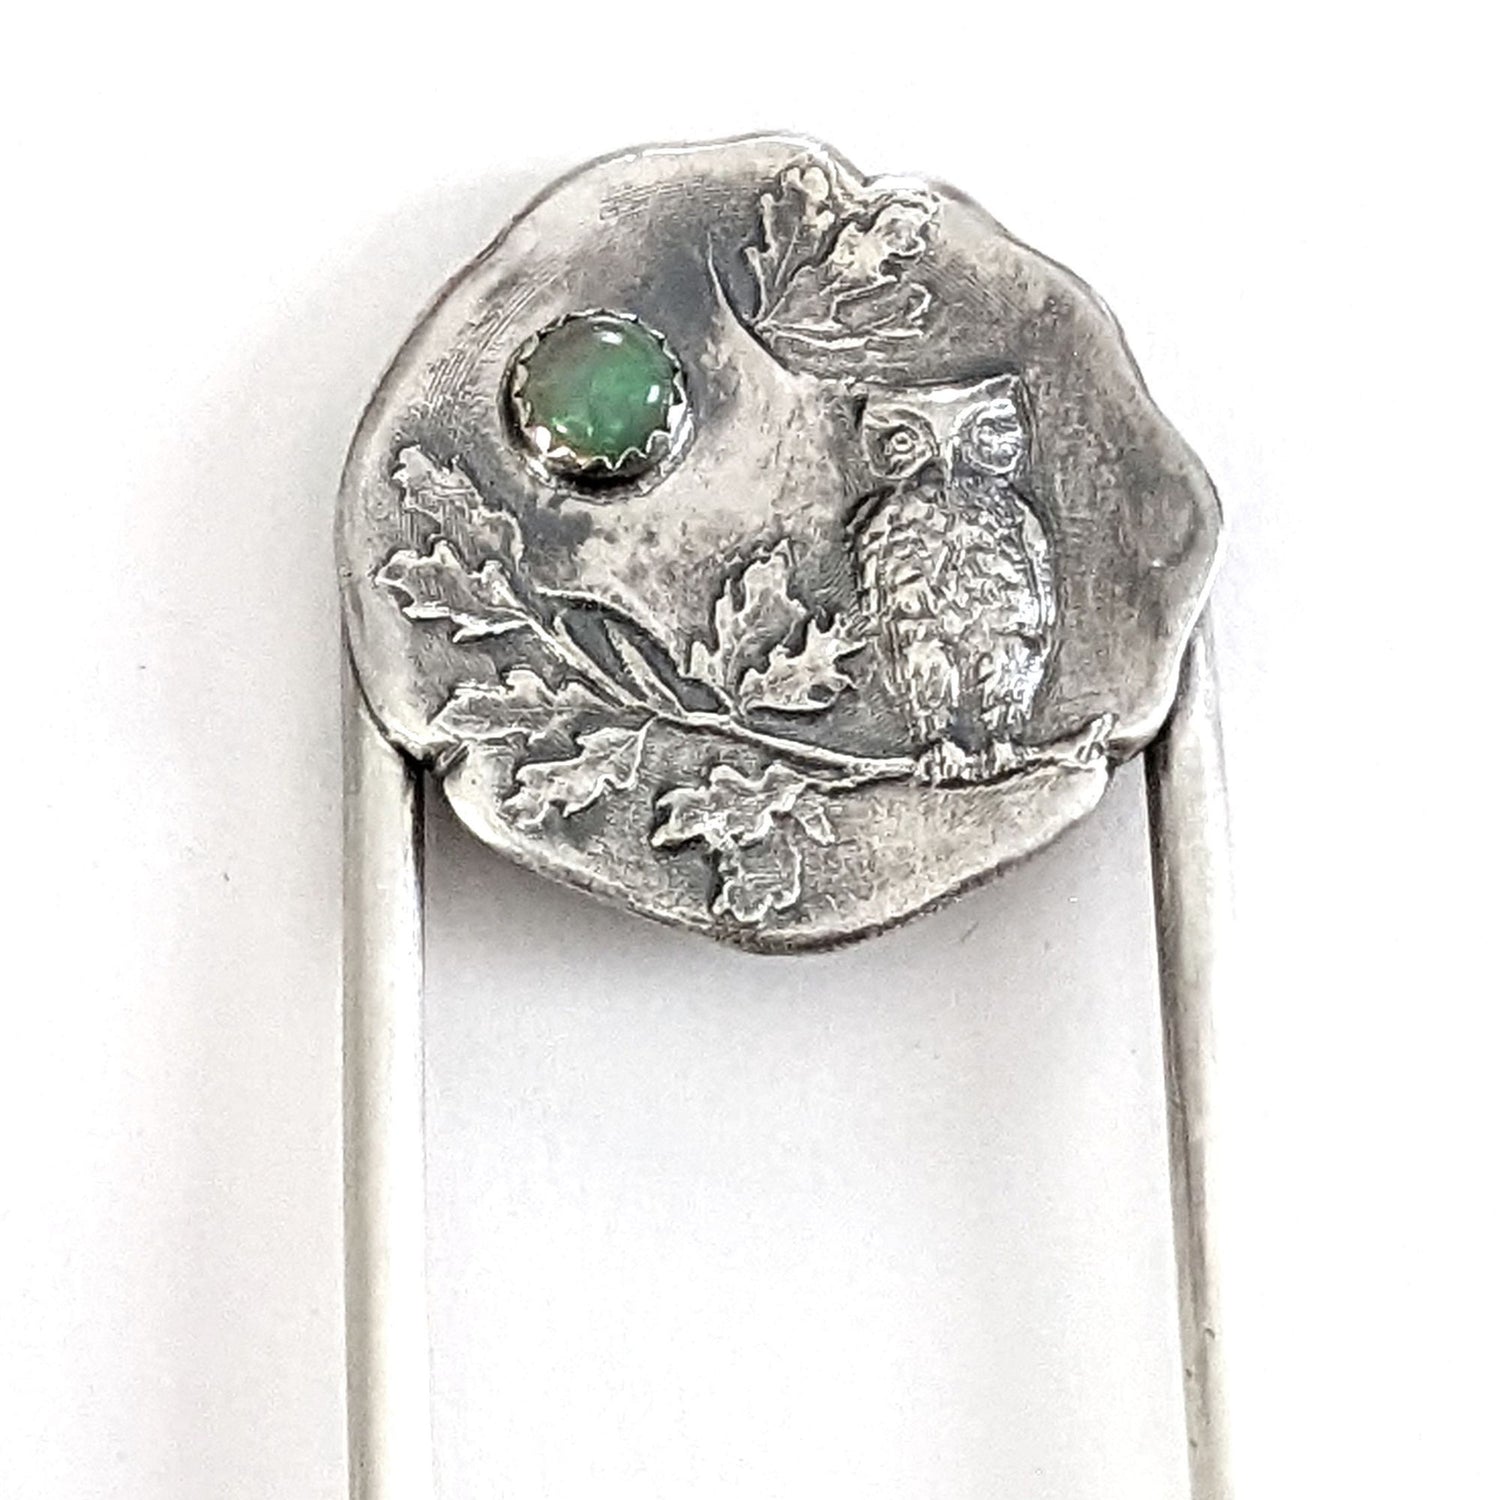 Sterling silver hair fork. The design at the top of the hair fork is a round sterling silver piece with a 3 dimensional design of an owl sitting on a tree branch. The branch has leaves, oak perhaps. Above the leaves there is a white opal gemstone to represent the moon. 